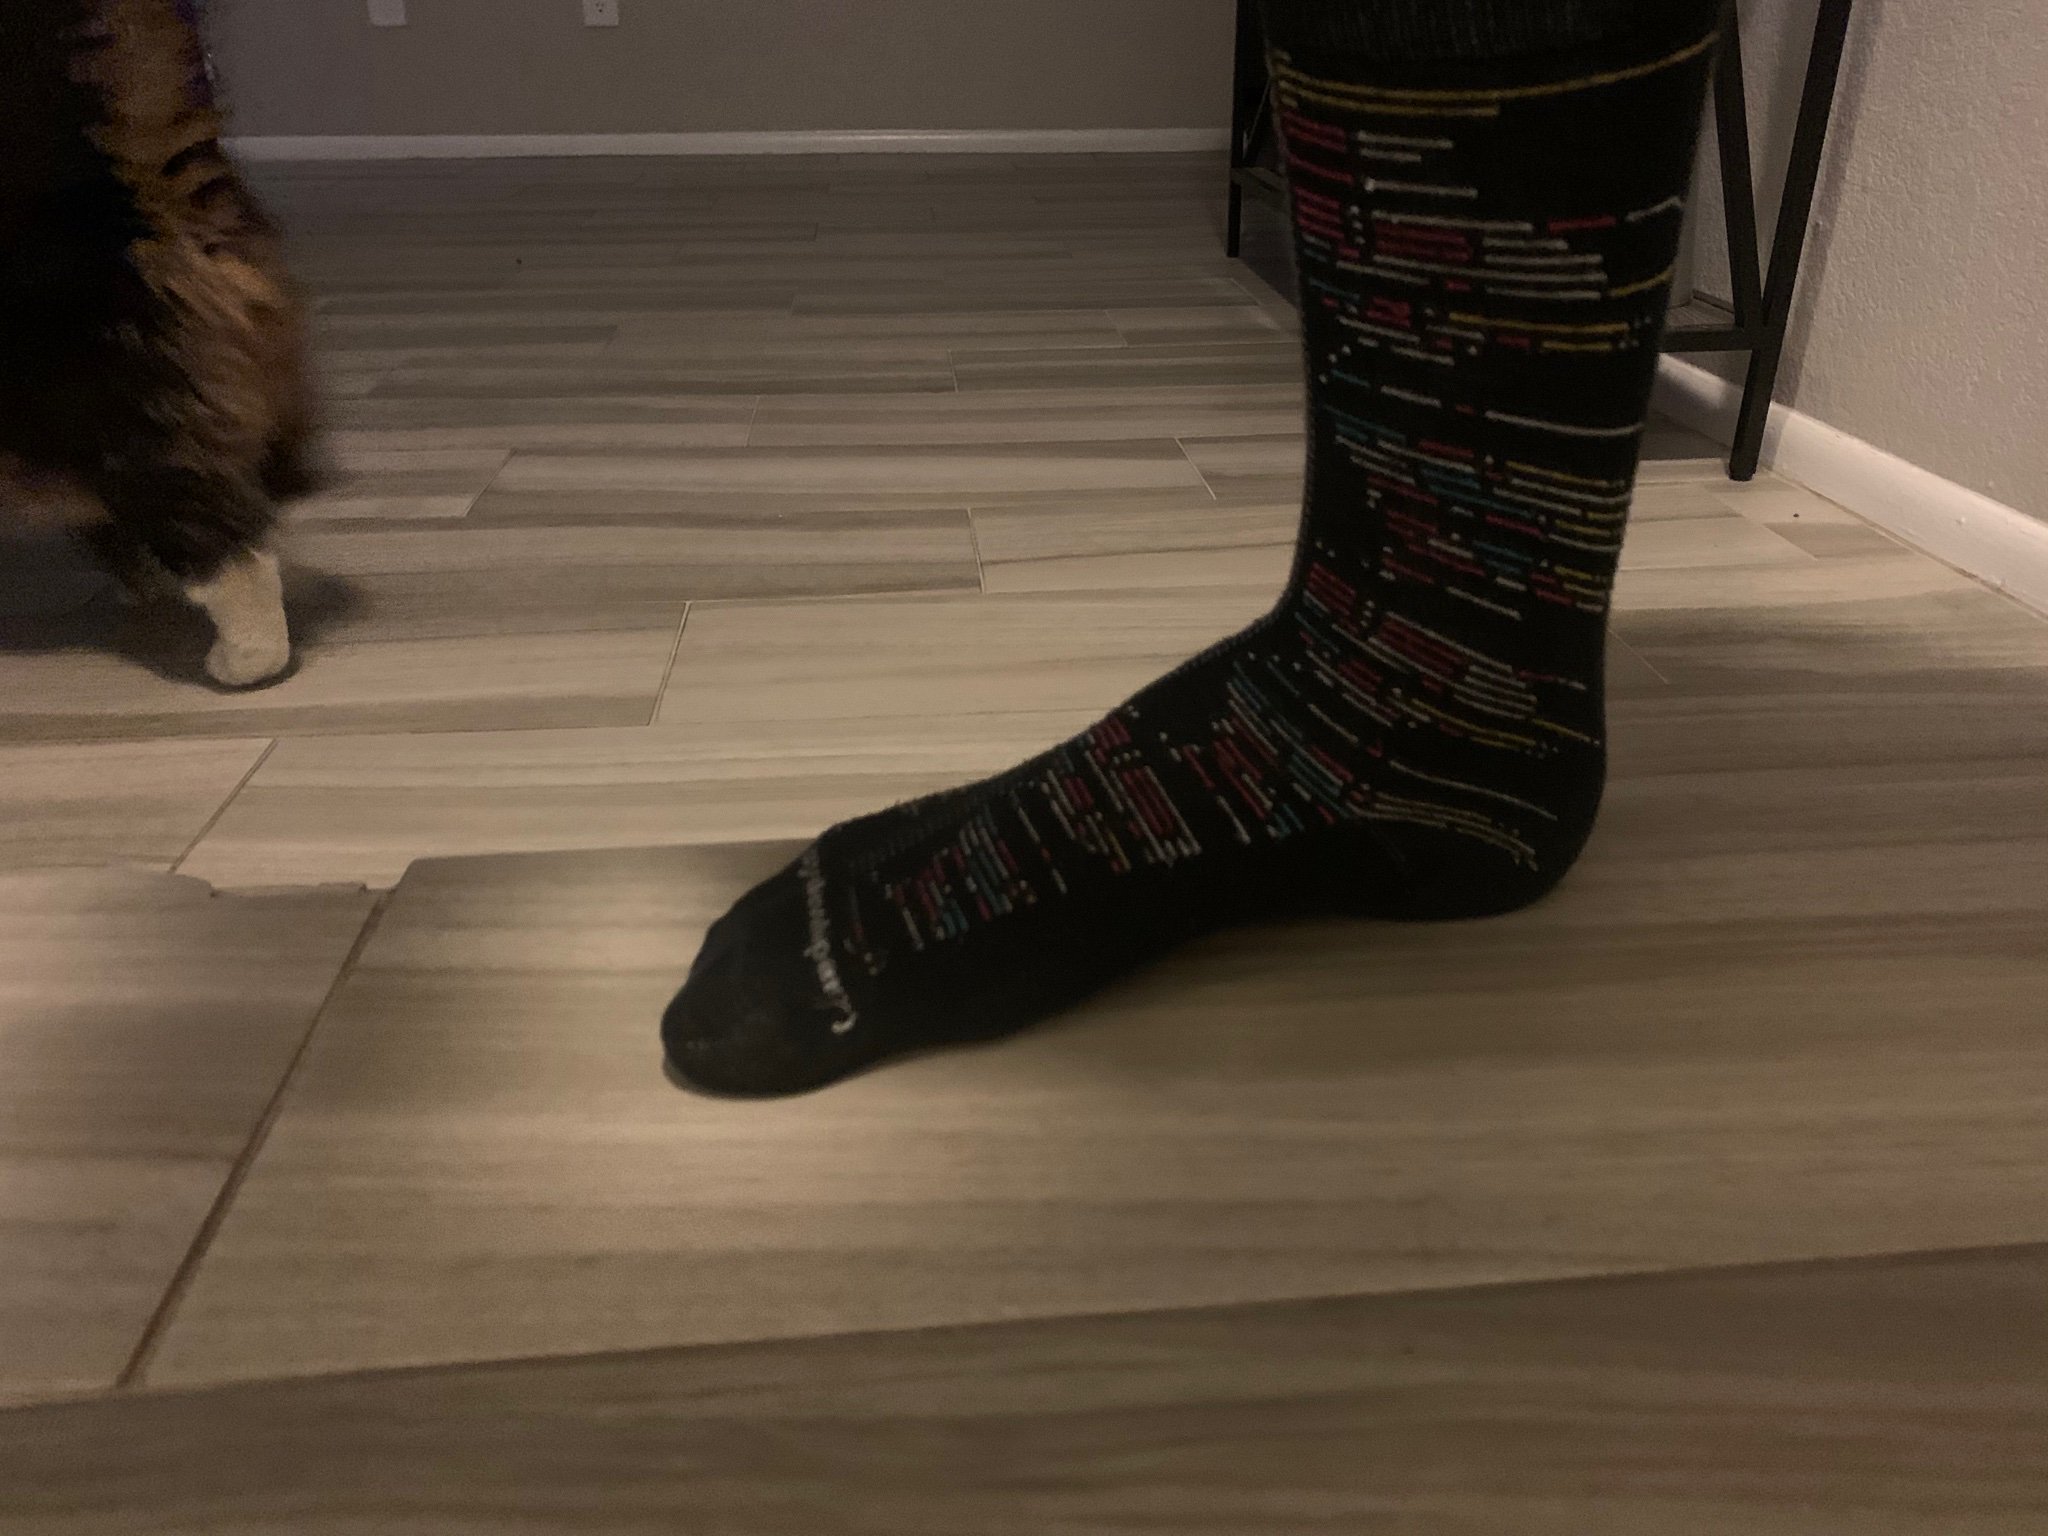 Chadthecreator On Twitter Dear Roblox Please Give Out More Cool Socks At Rdc Next Year Like These Lua Socks From 2018 They Are Wearing Out Bc I Love Them I Am The Best Chad Rhoam Bosphoramus Https T Co Vq1agcomsj - what does chadthereator on roblox look like